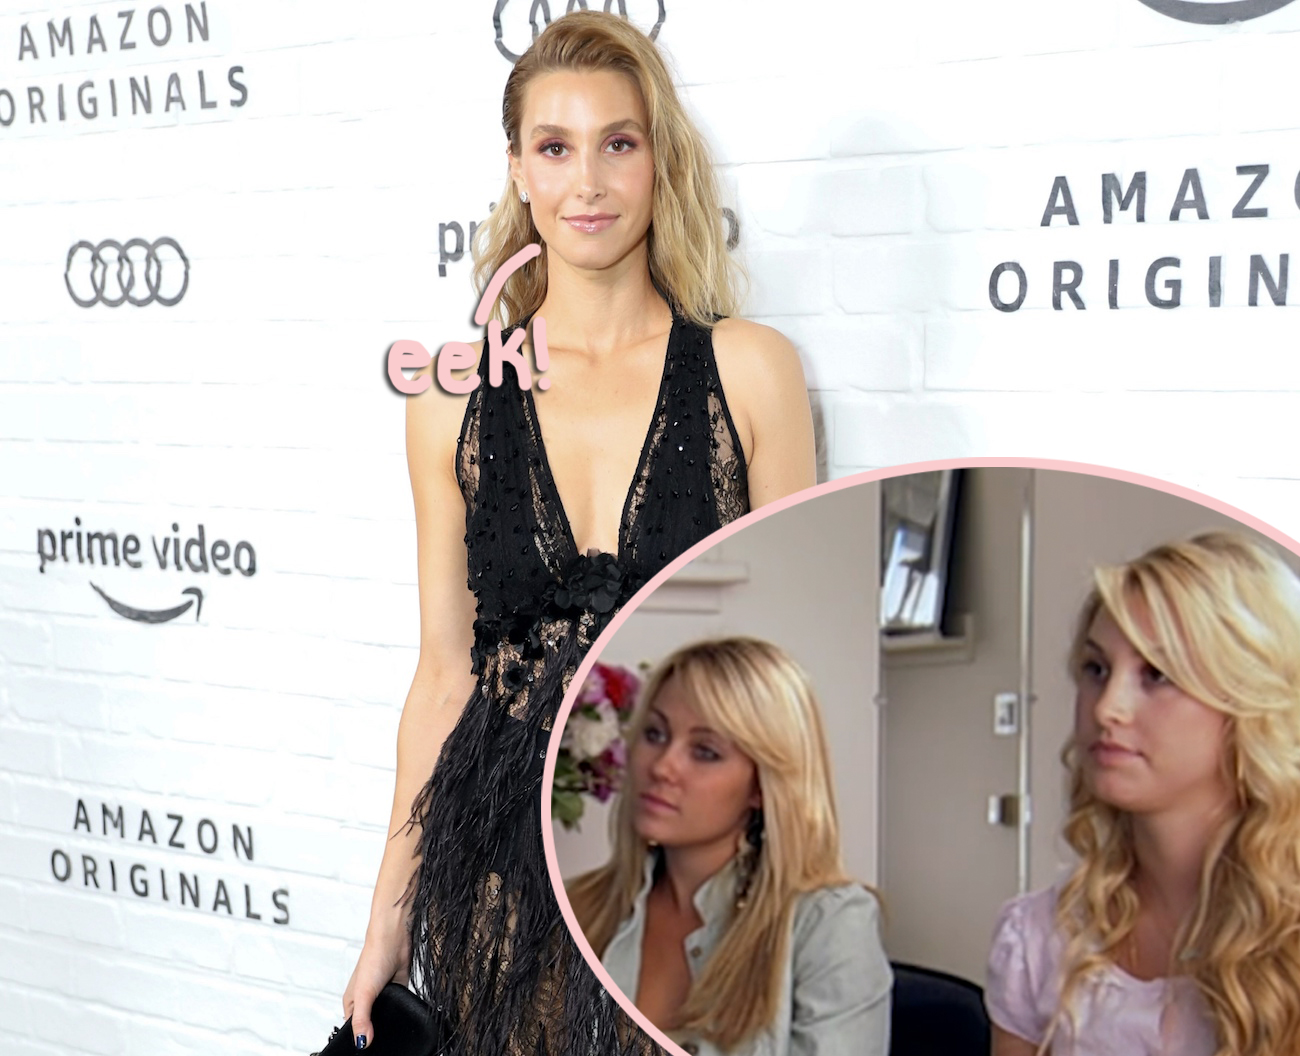 Lauren Conrad and Whitney Port Discuss Friendship After The Hills